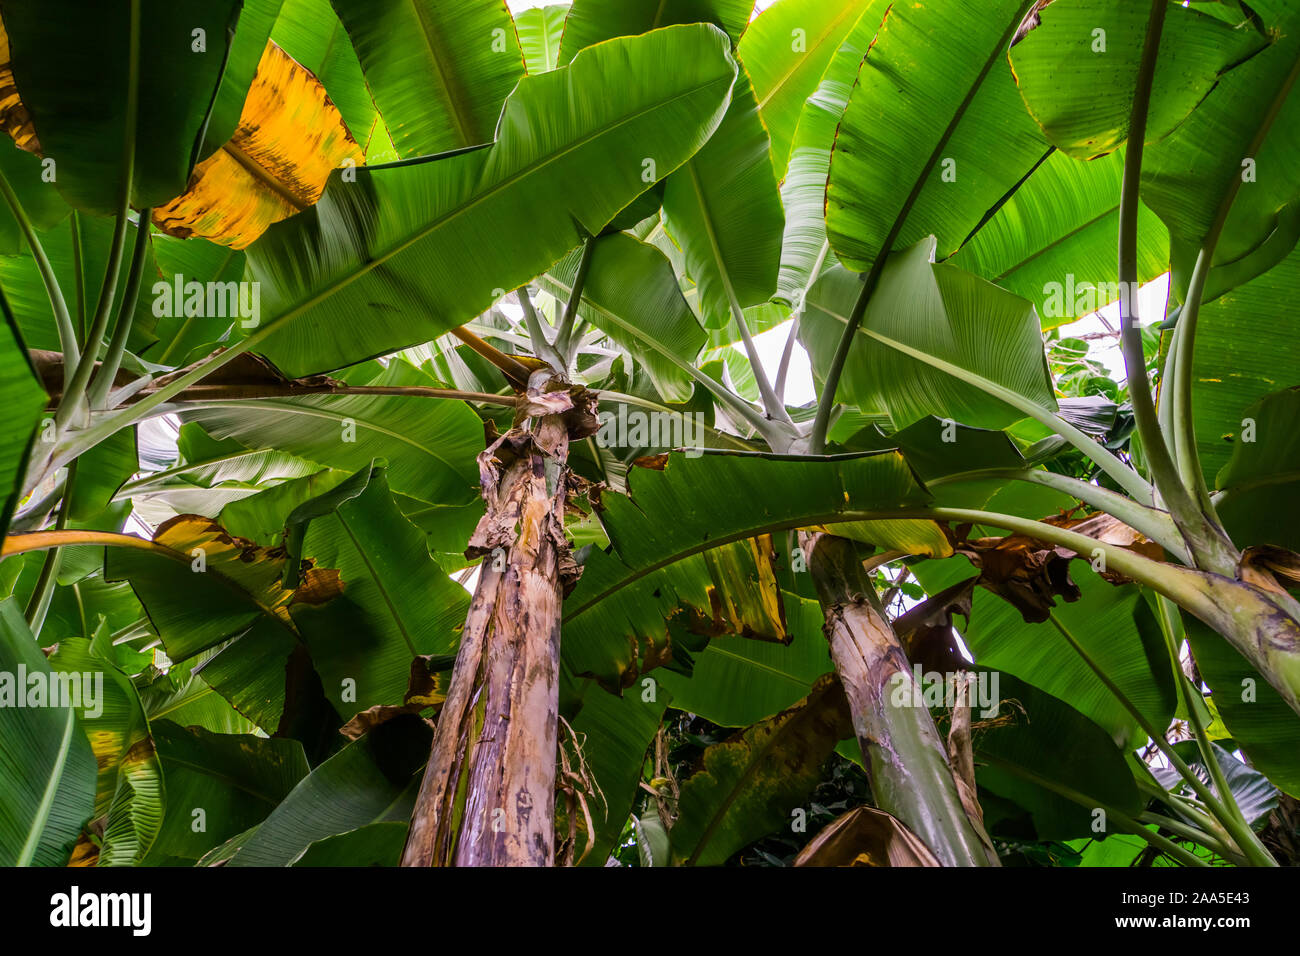 sky view of many banana tree plants, tropical plant specie from Asia, nature and horticulture background Stock Photo